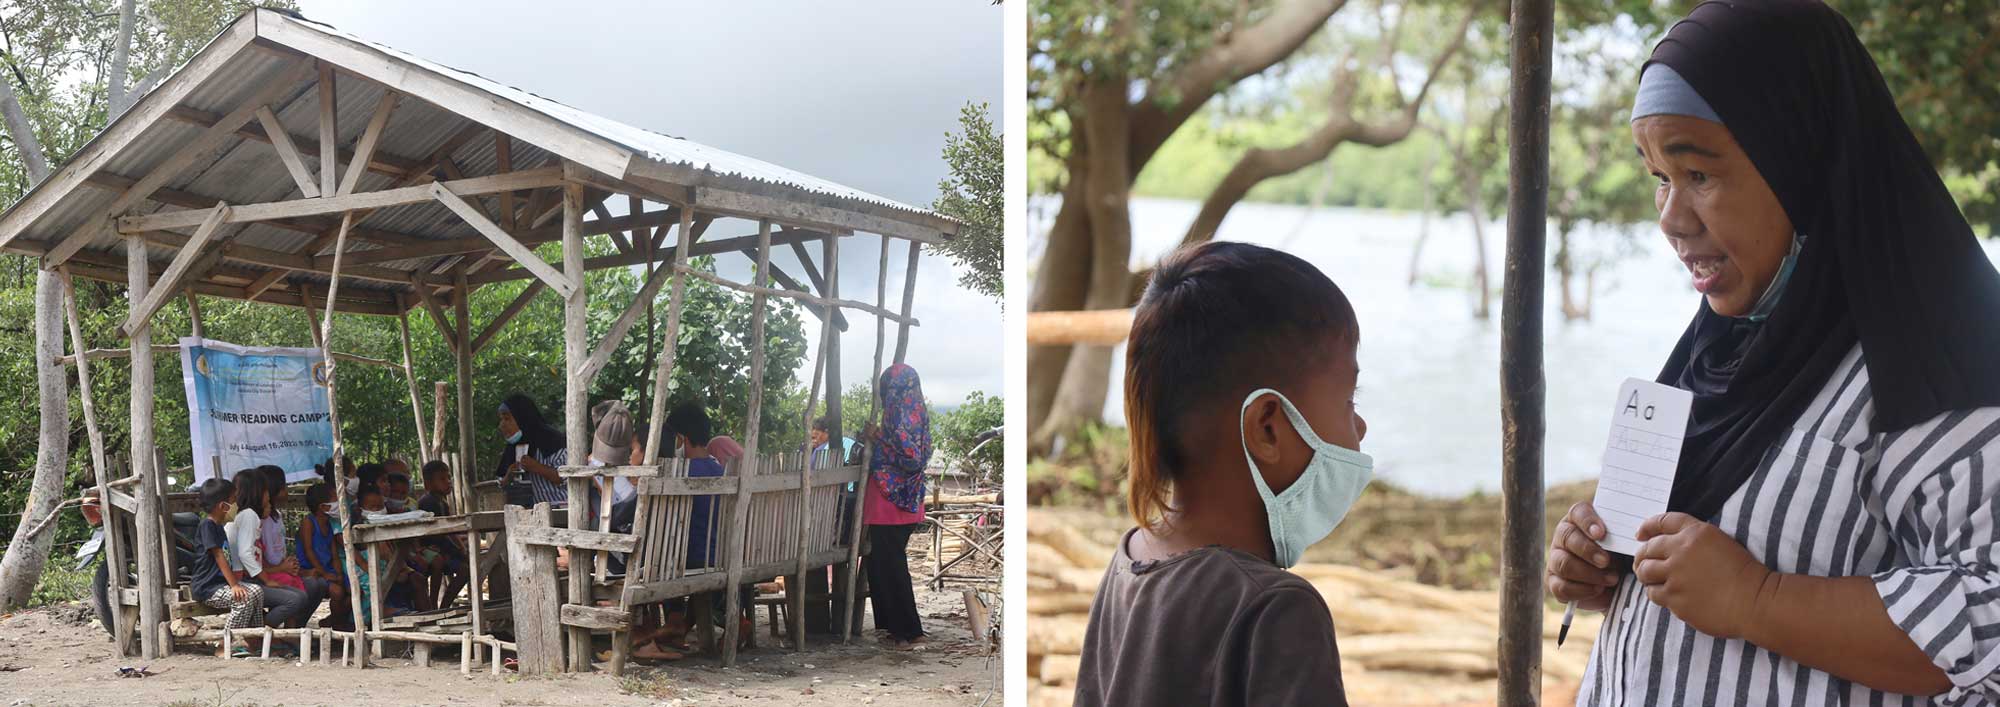 Left image: a group of children are seated outside under a wooden canopy structure. Right image: an adult woman with a note in hand speaks to a child wearing a medical mask. 